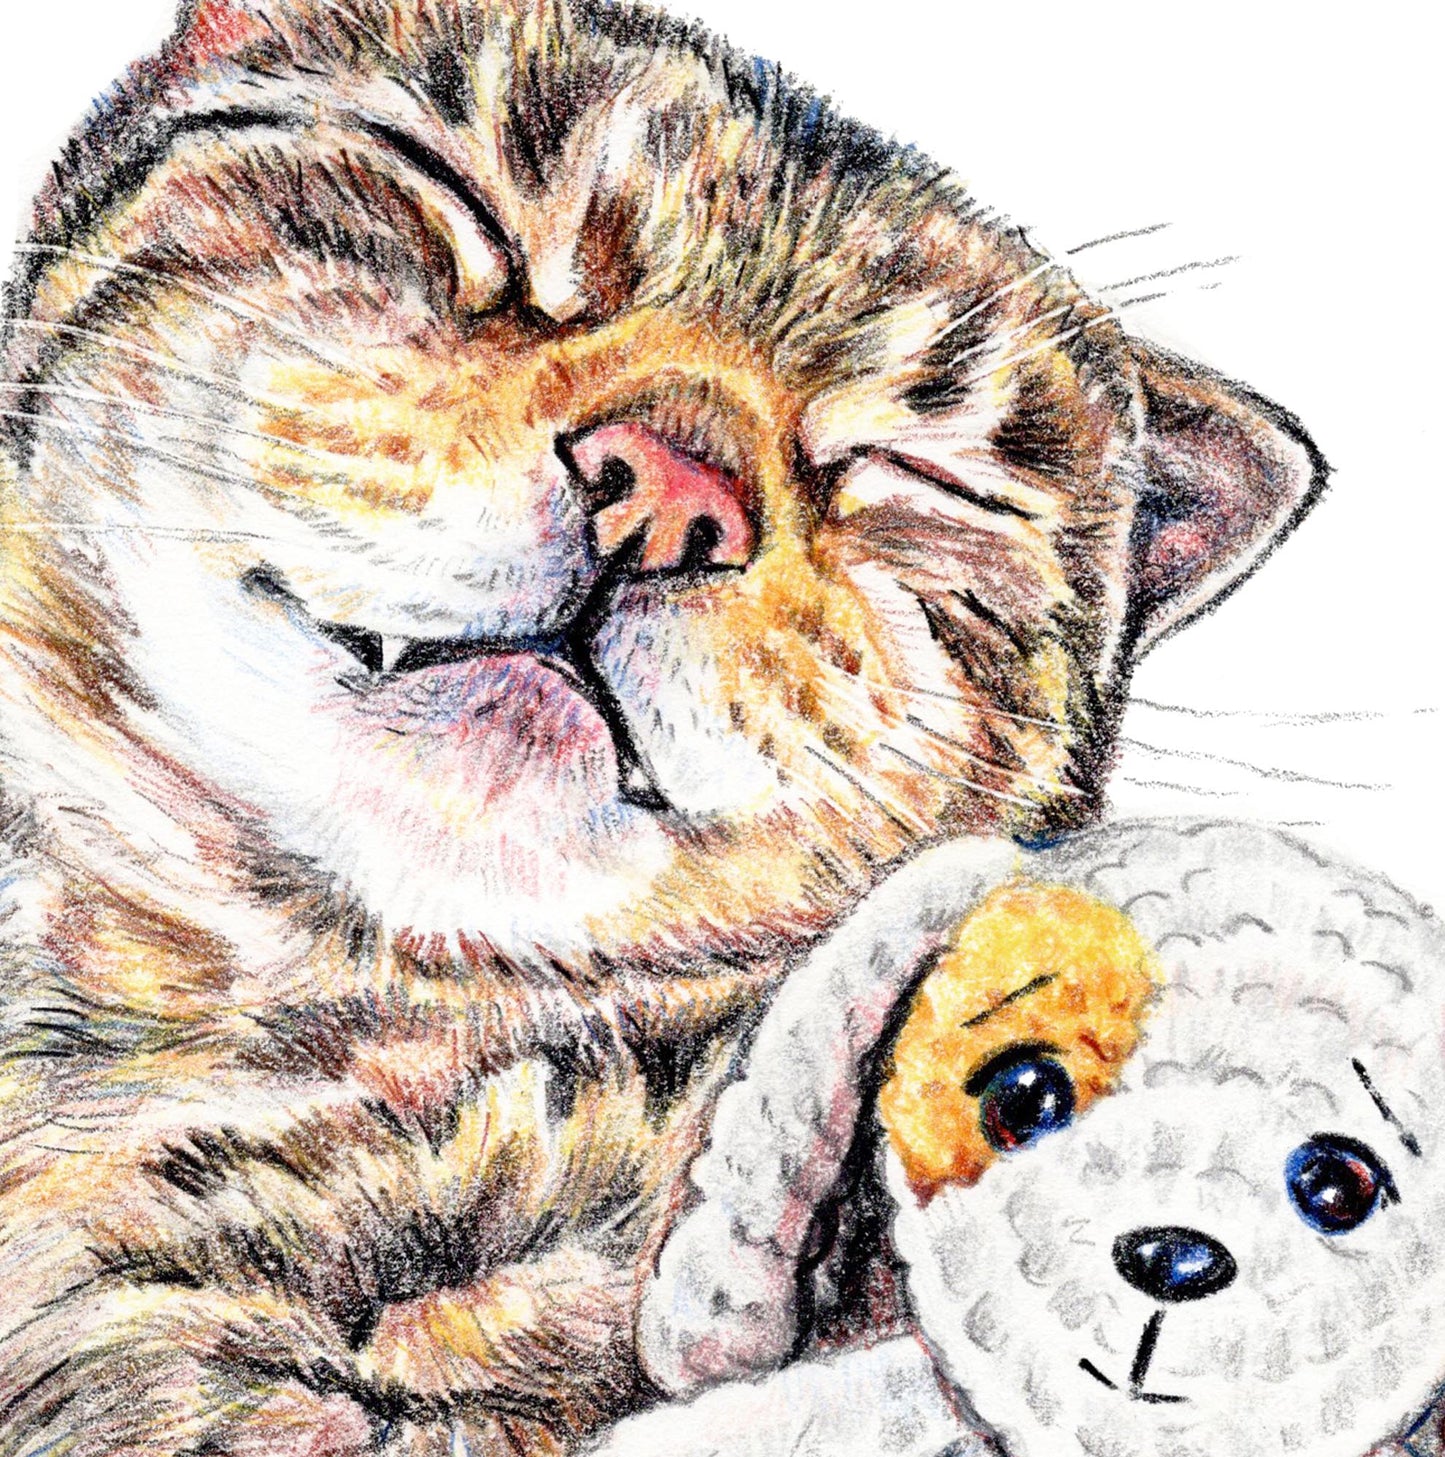 Coloured pencil drawing of a brown tabby cat napping with stuffed dog by Deidre Wicks